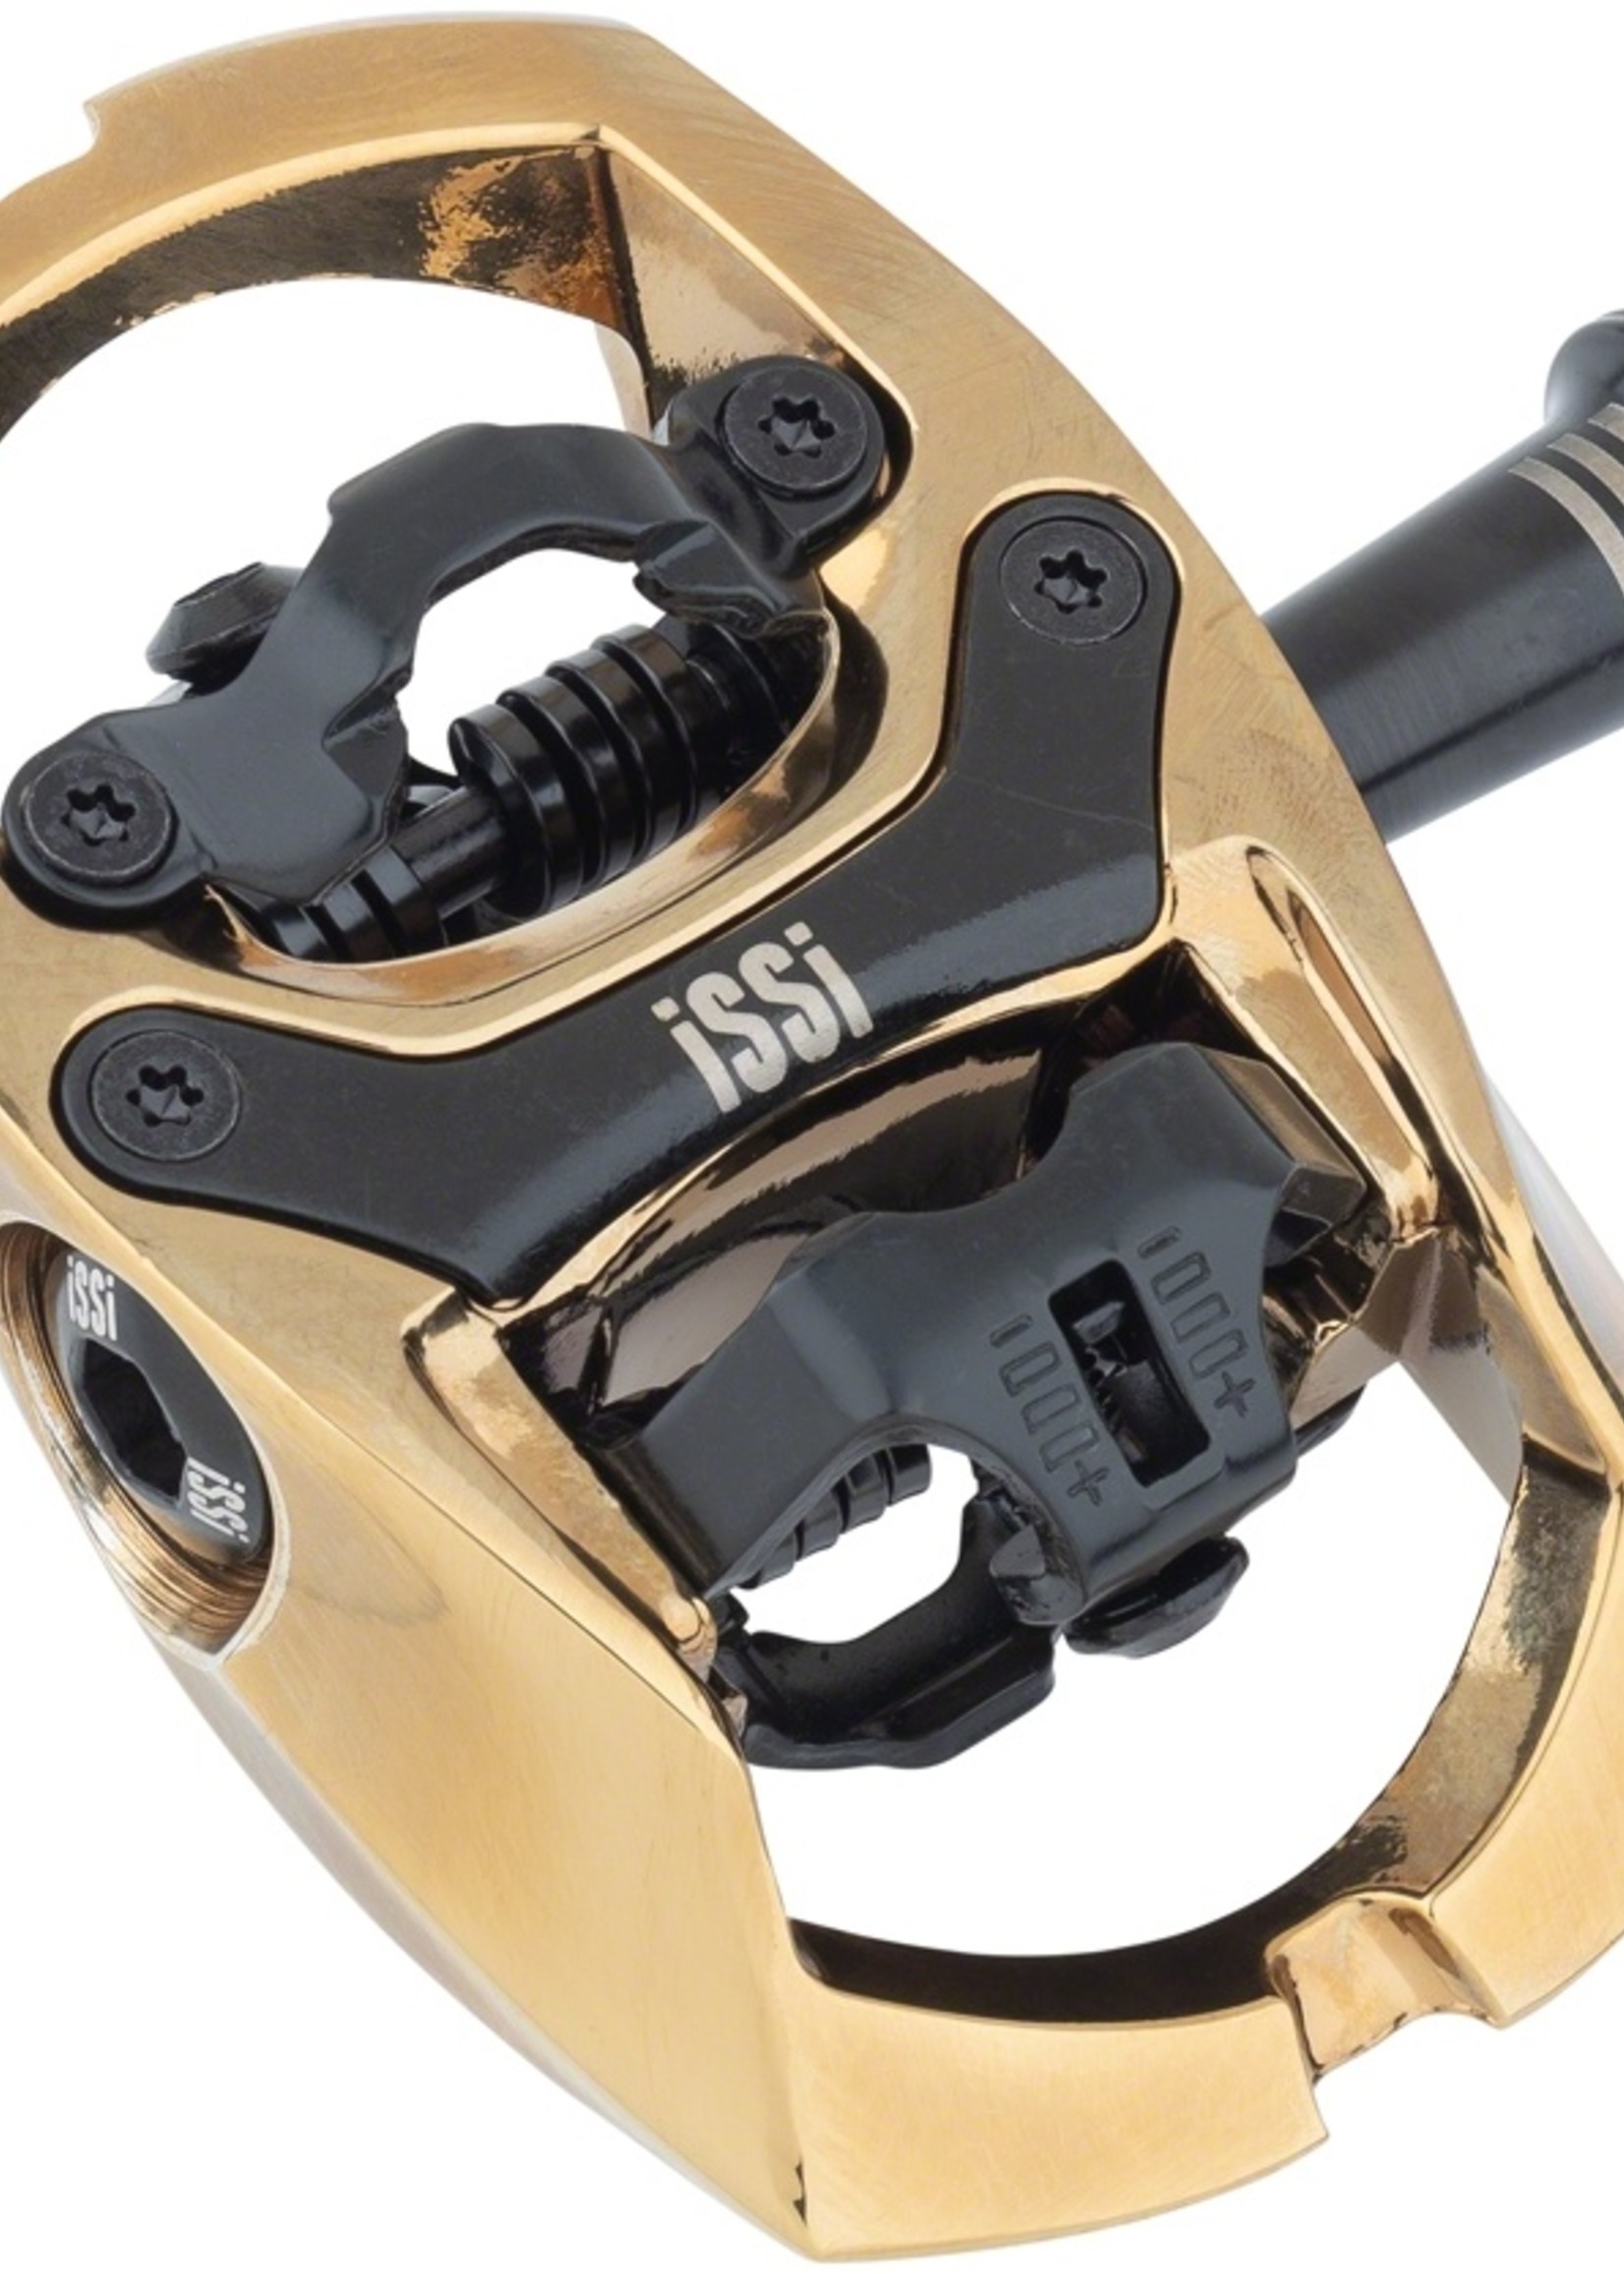 iSSi Trail III Pedals - Dual Sided Clipless with Platform, Aluminum, 9/16", Bullion Gold